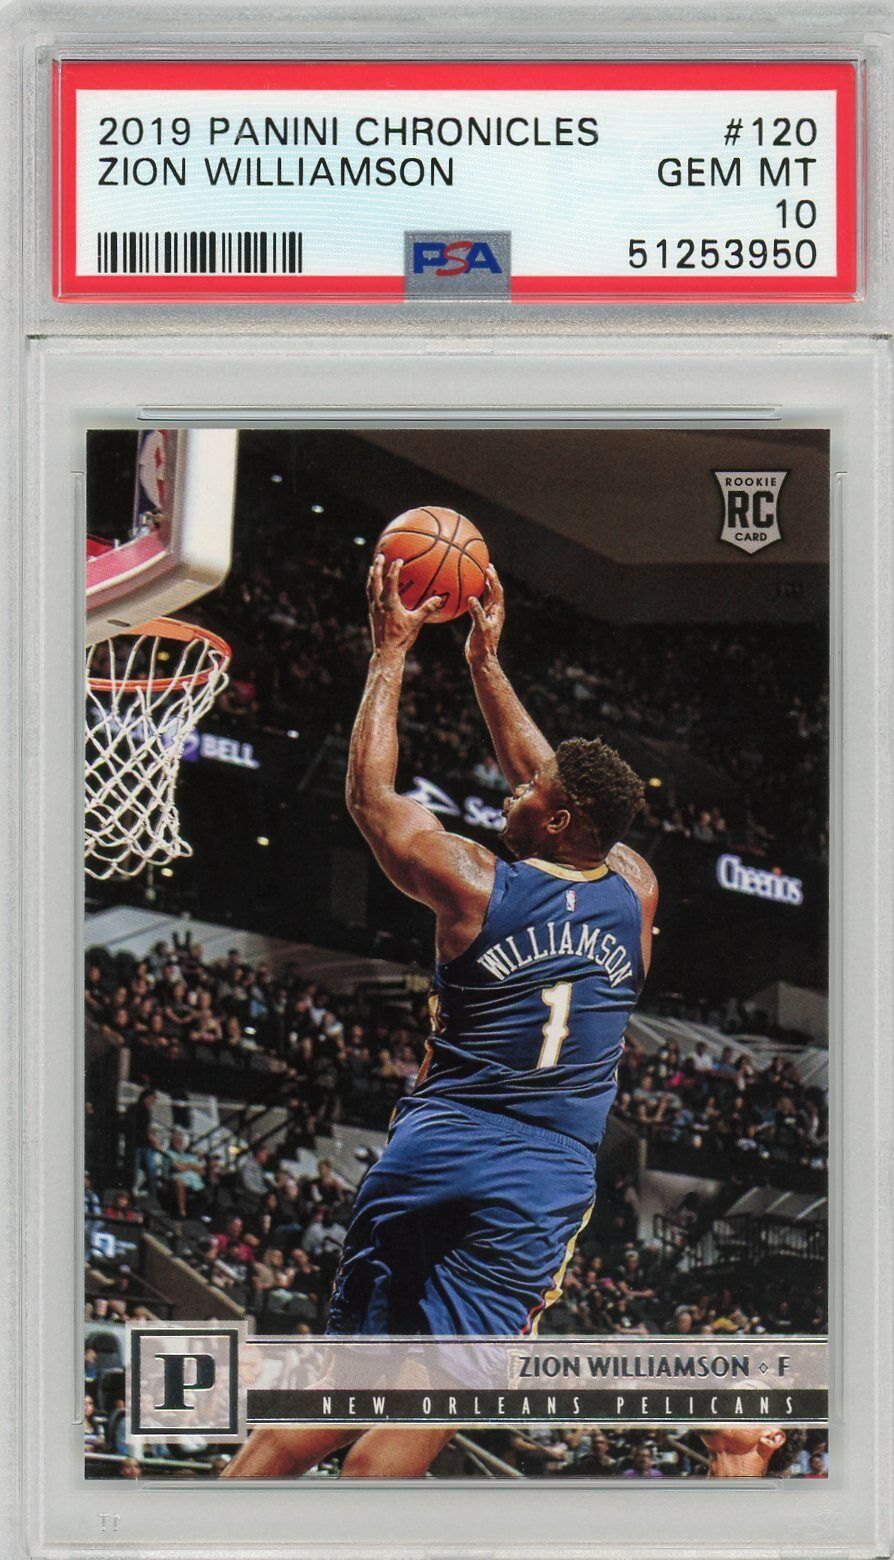 2019 PANINI CHRONICLES ZION WILLIAMSON ROOKIE CARD #120 ***GEM MINT PSA 10***. rookie card picture